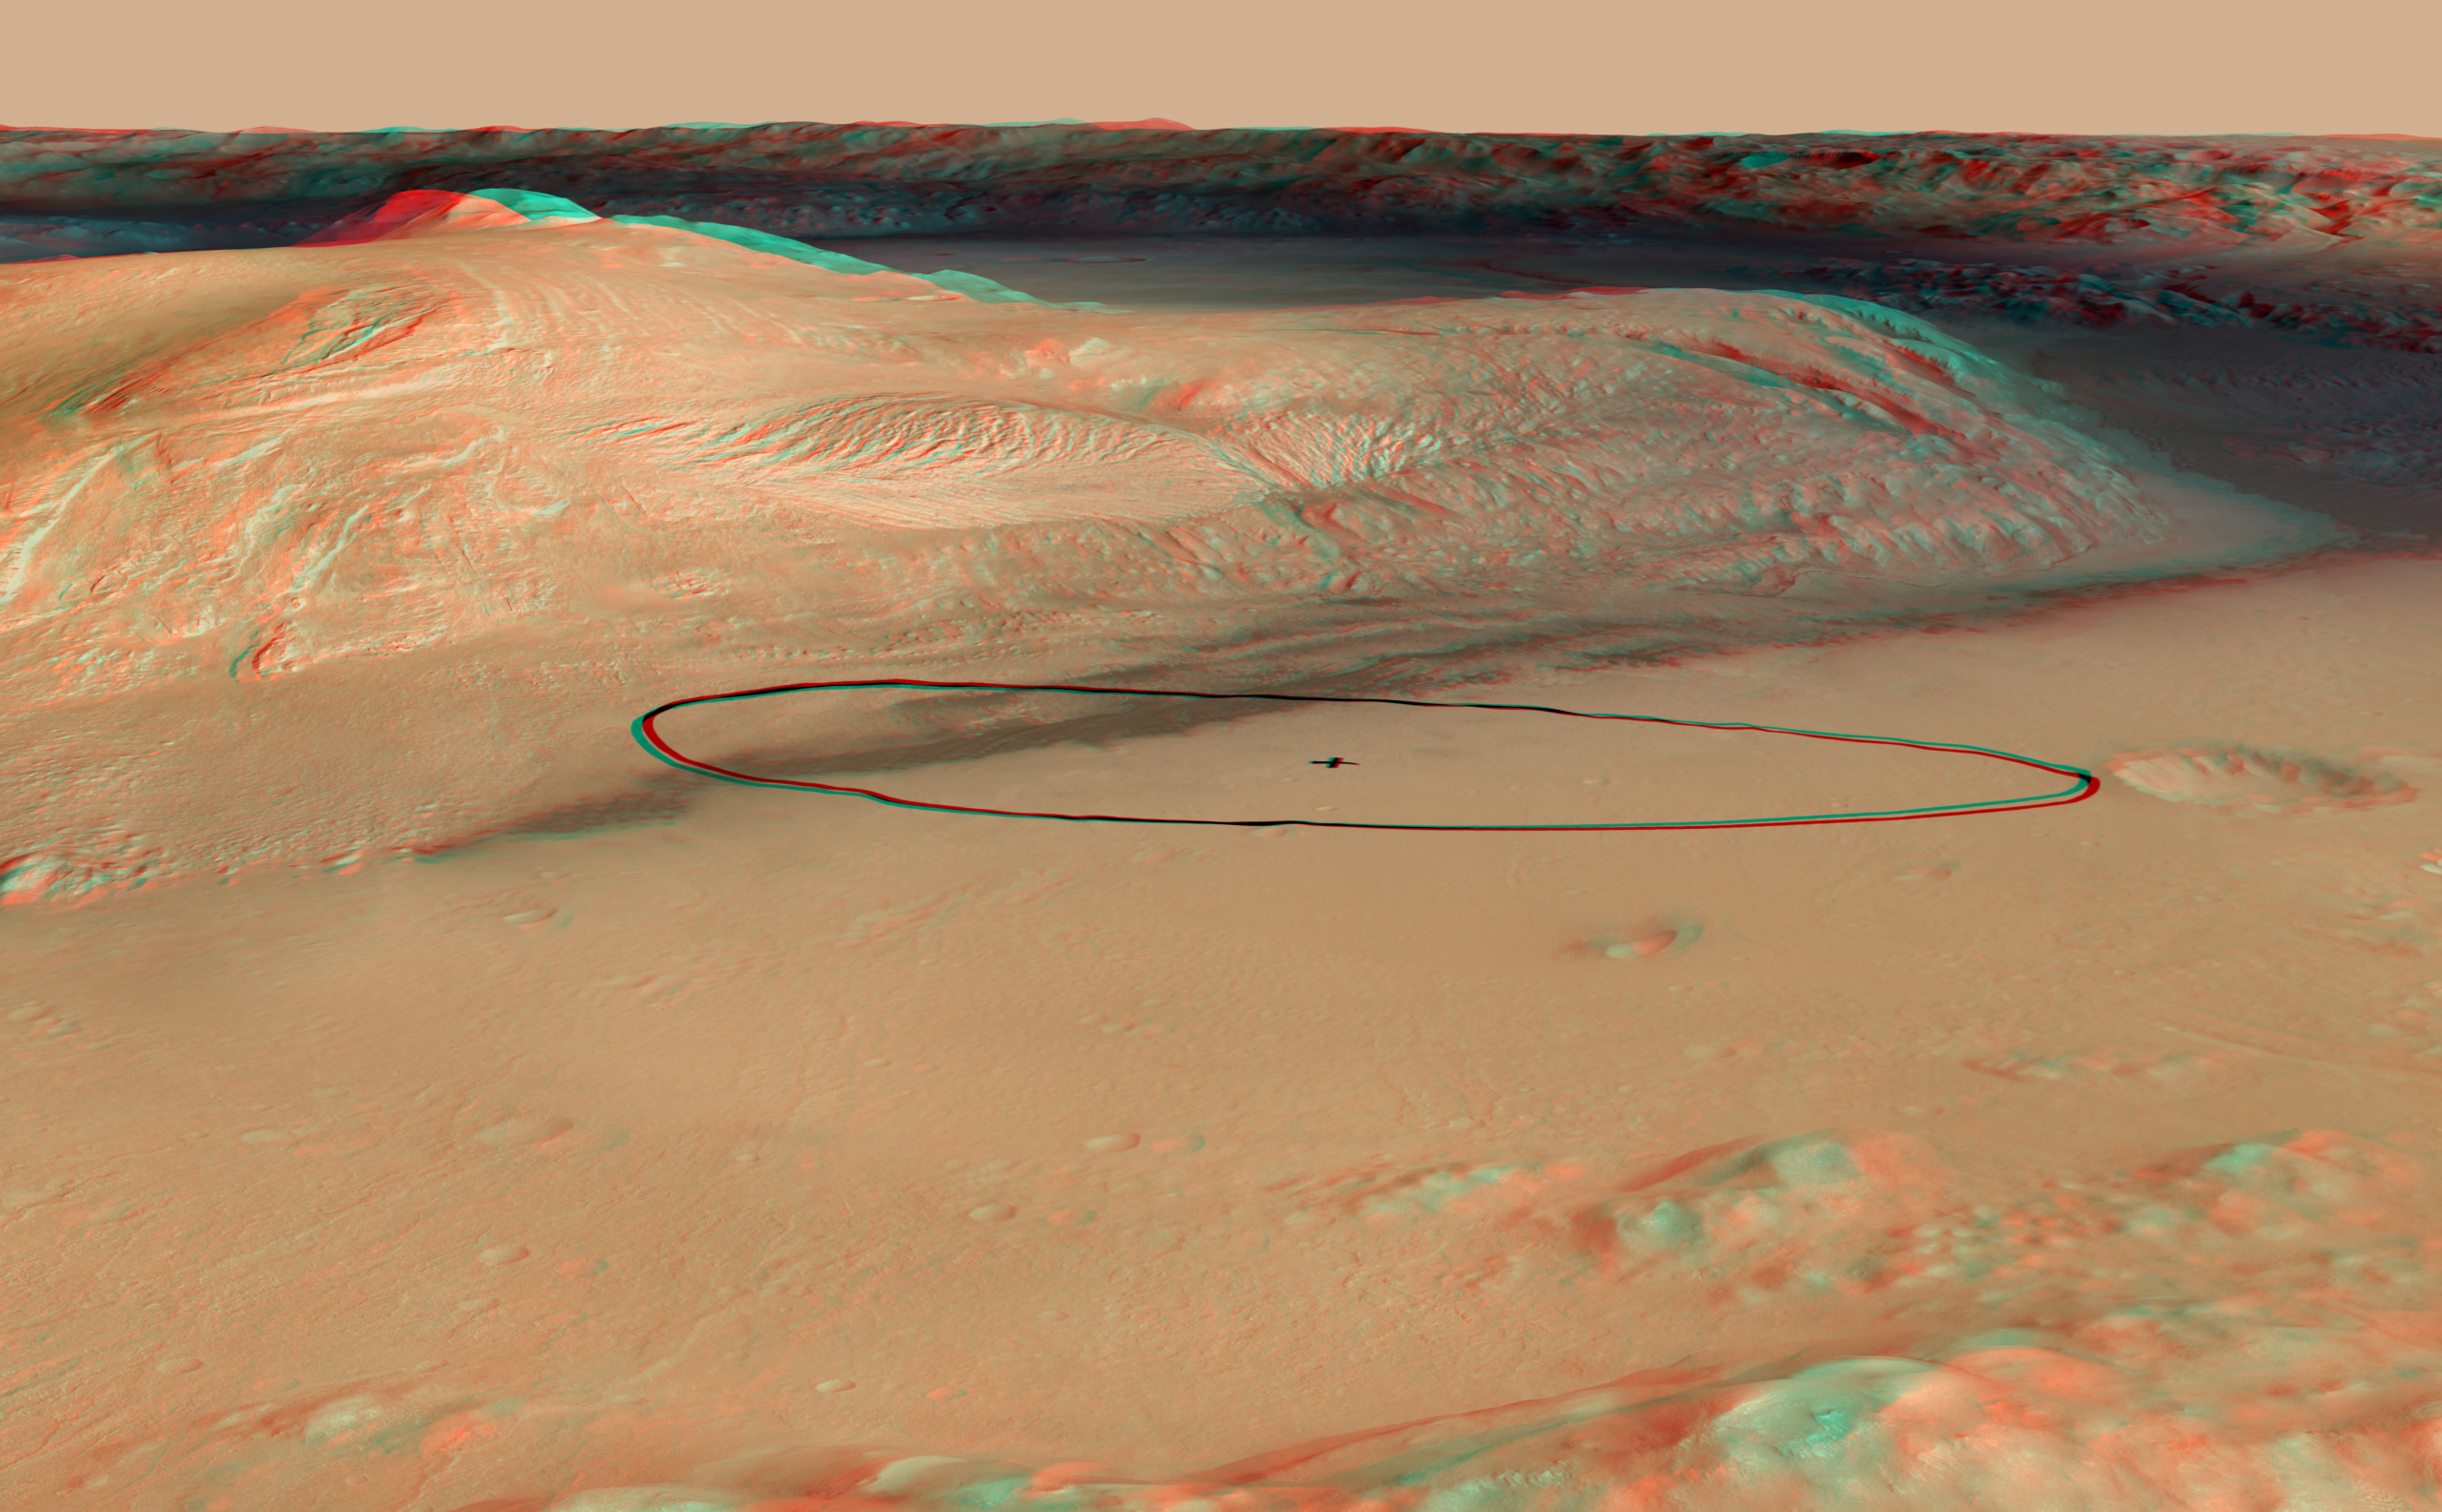 As of June 2012, the target landing area for Curiosity, the rover of NASA's Mars Science Laboratory mission, is the ellipse marked on this image, about 12 miles long and 4 miles wide (20 kilometers by 7 kilometers).